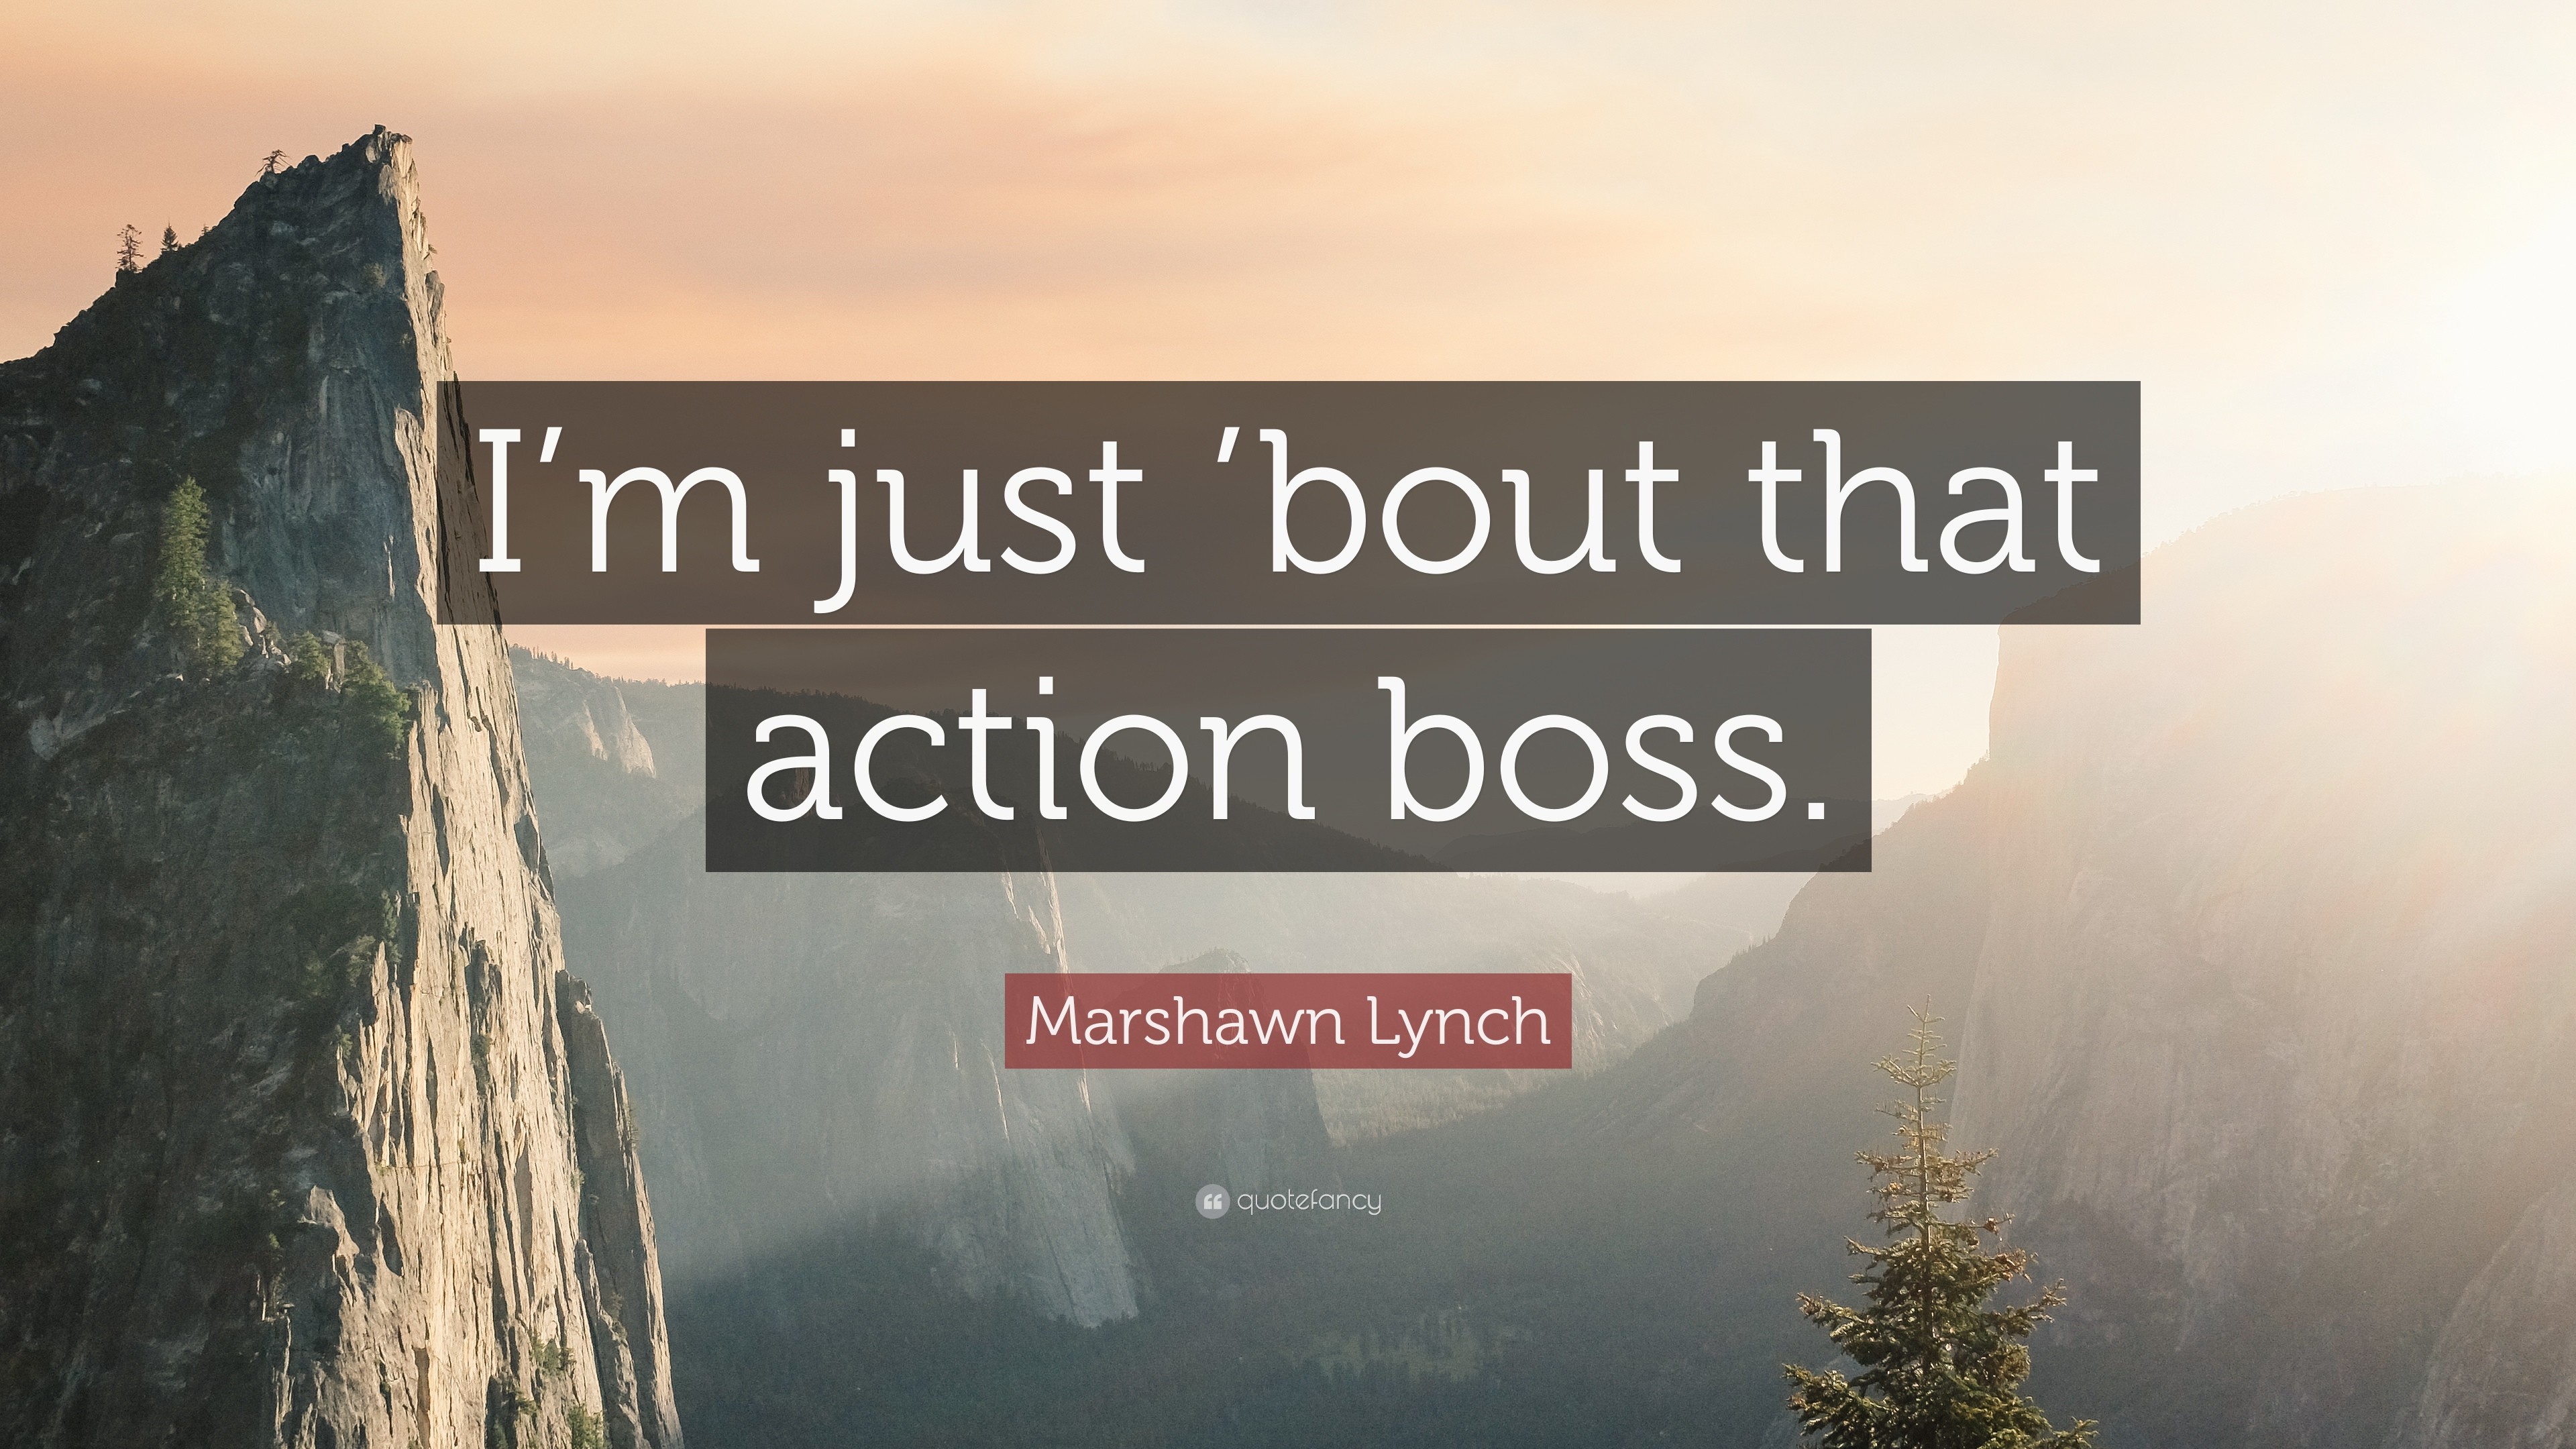 3840x2160 Marshawn Lynch Quote: “I'm just 'bout that action boss.”